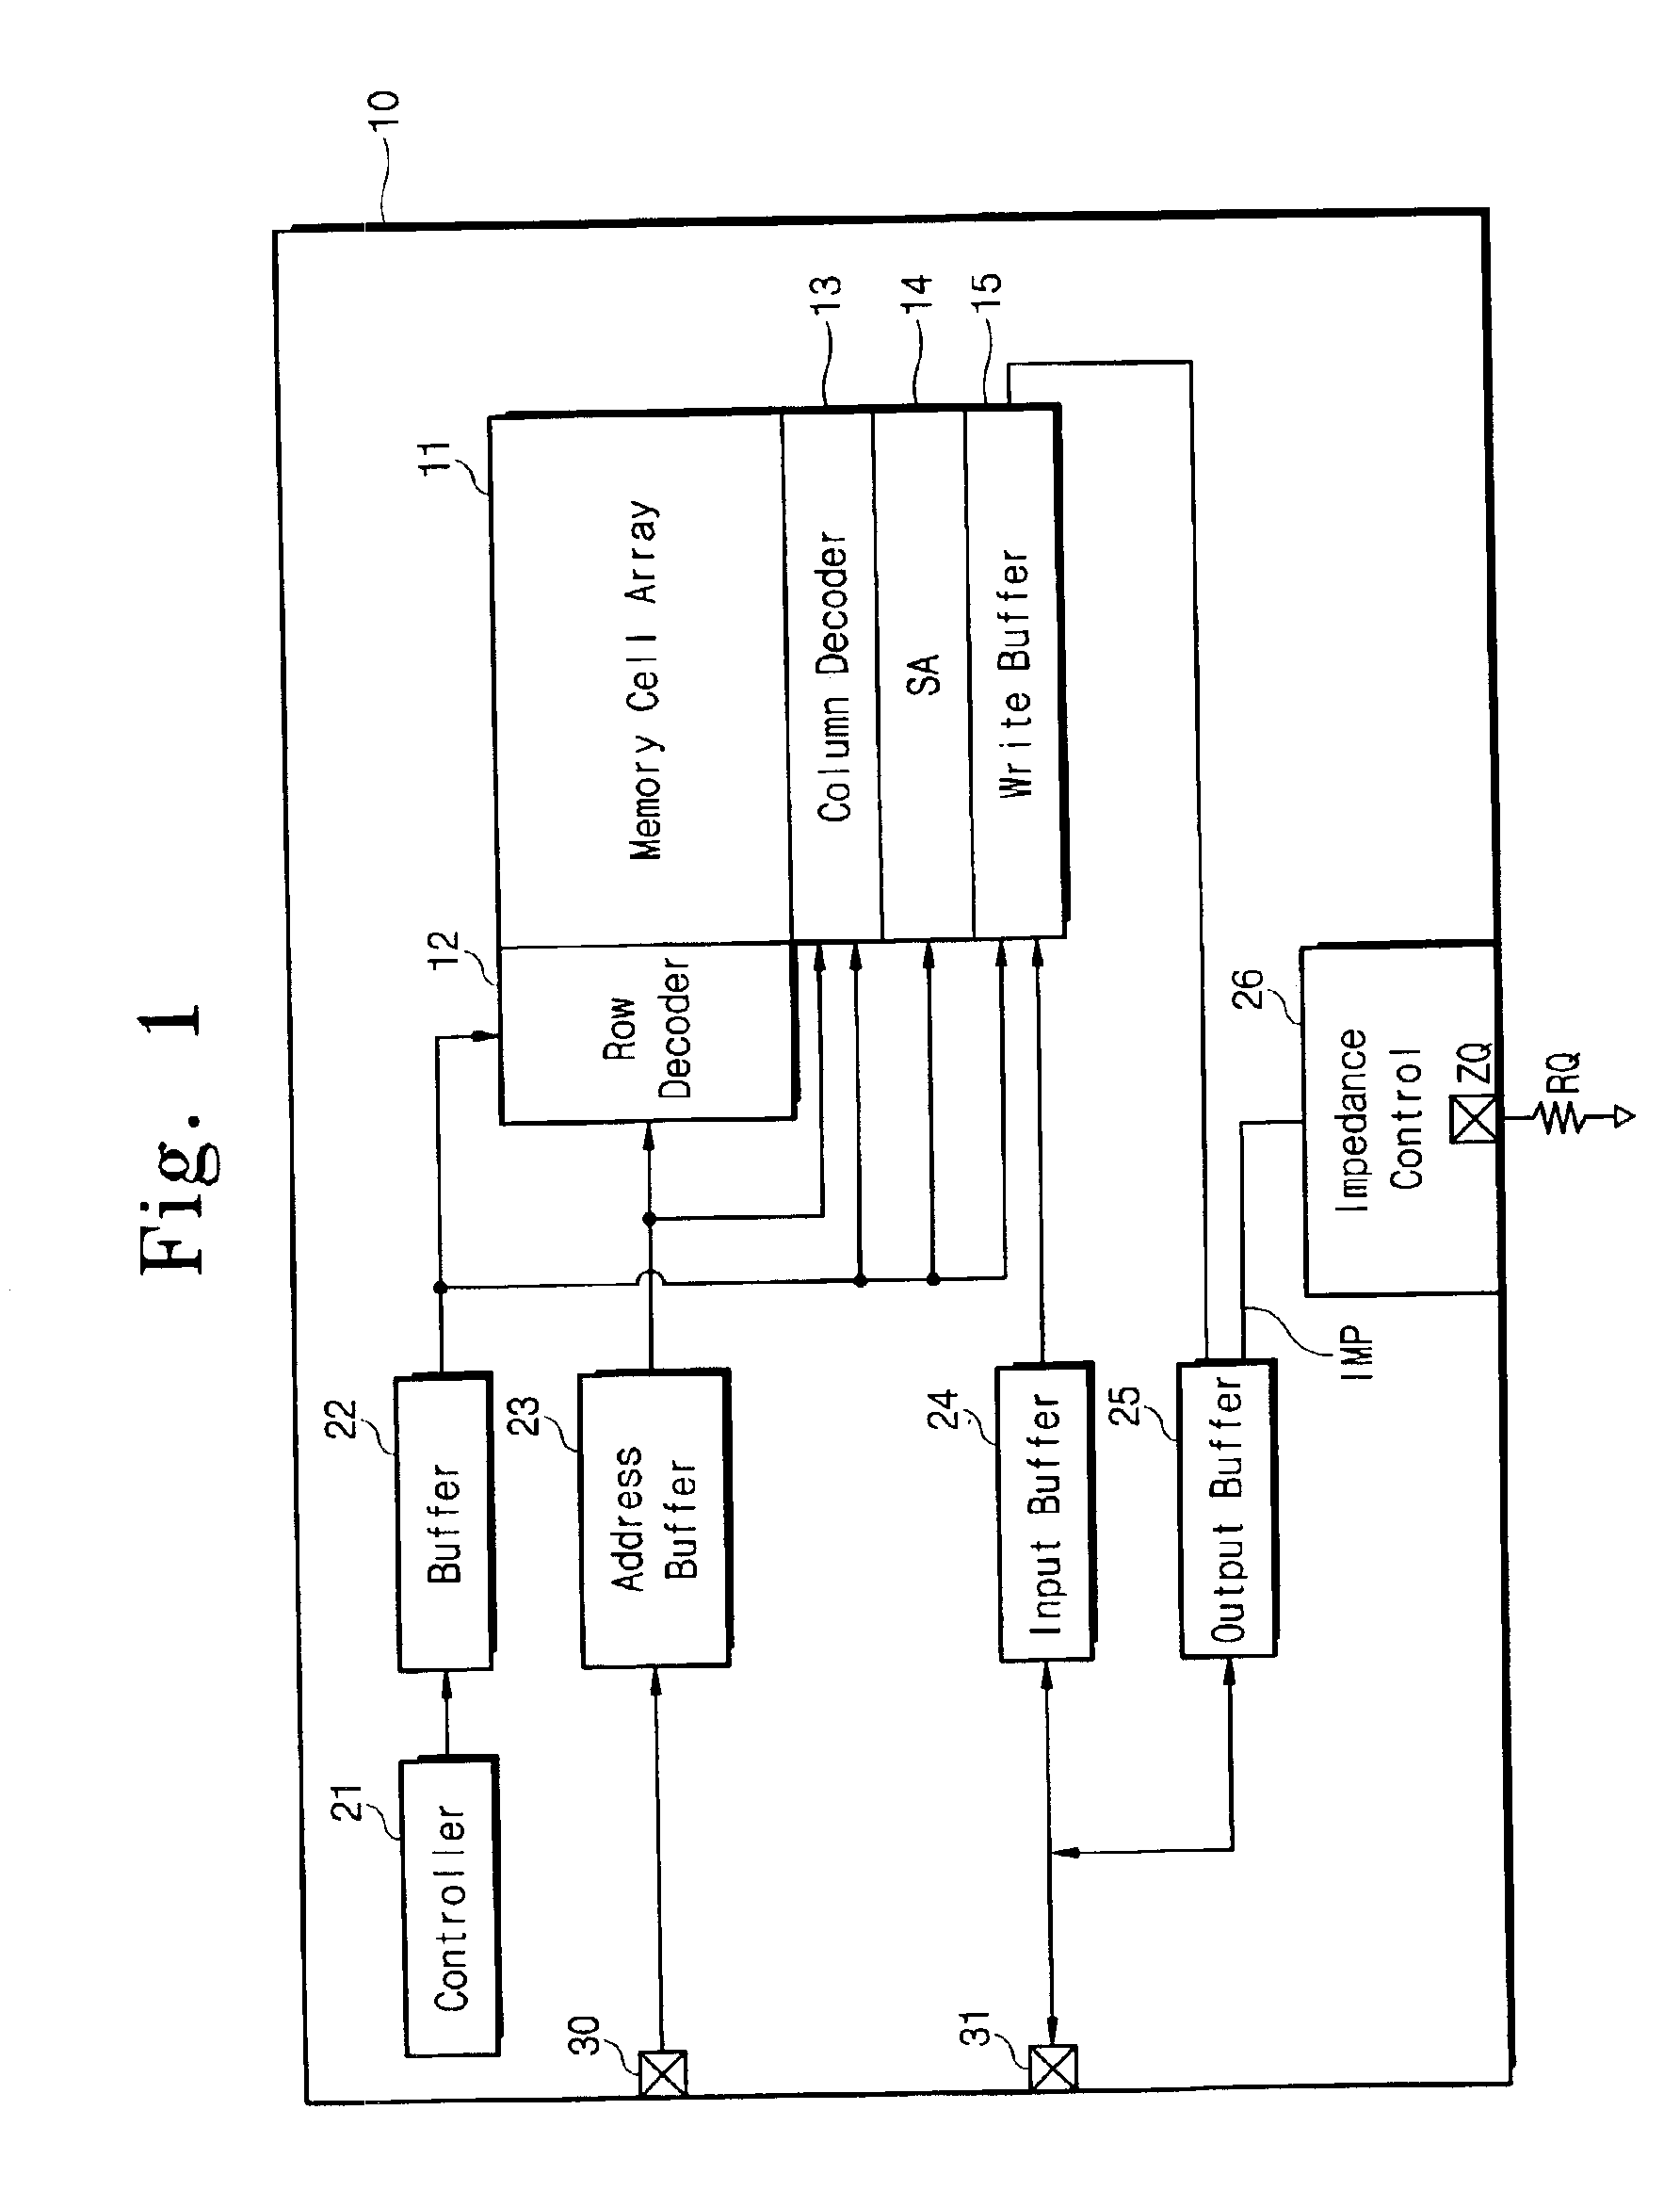 Semiconductor device with impedance control circuit